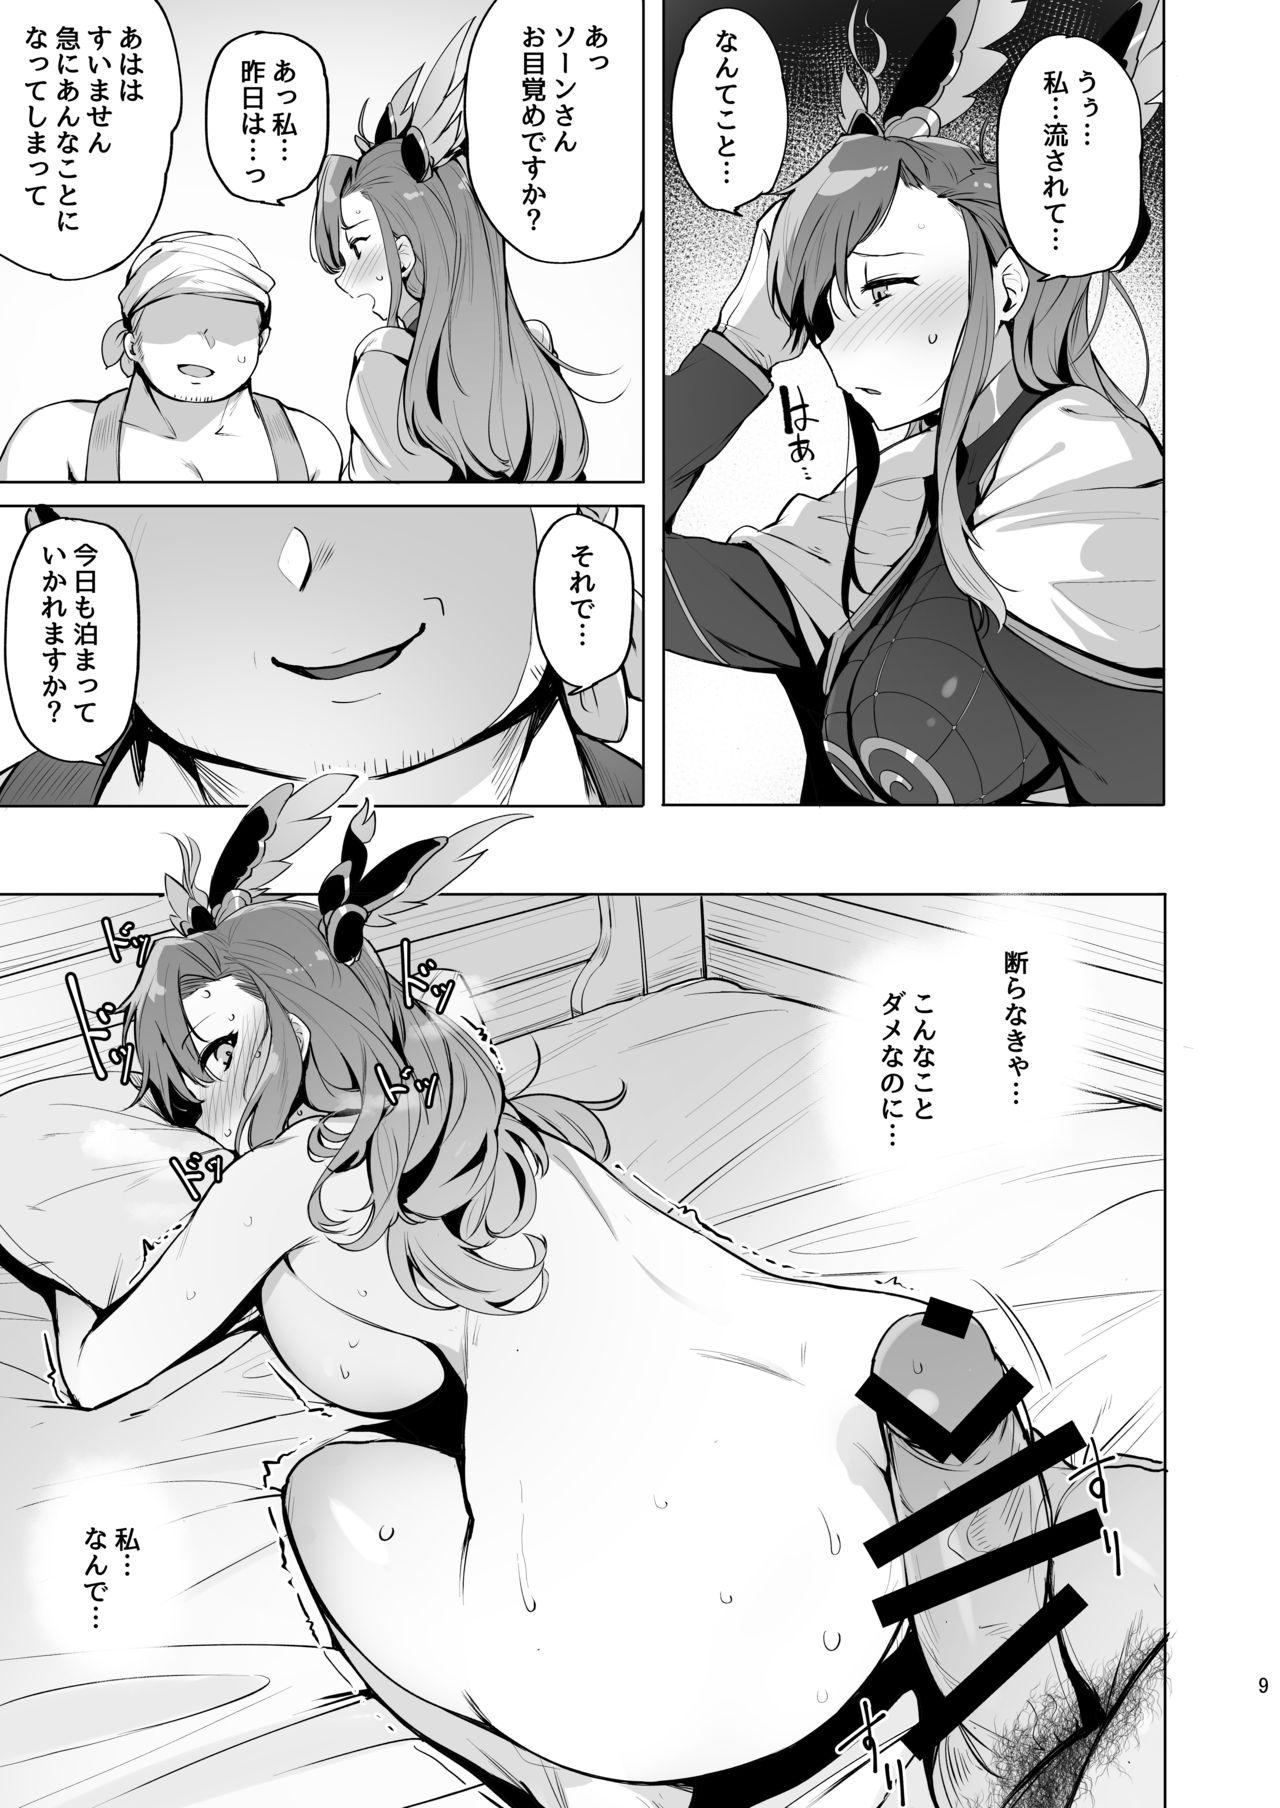 Pussysex Deep in the eyes - Granblue fantasy Insertion - Page 9